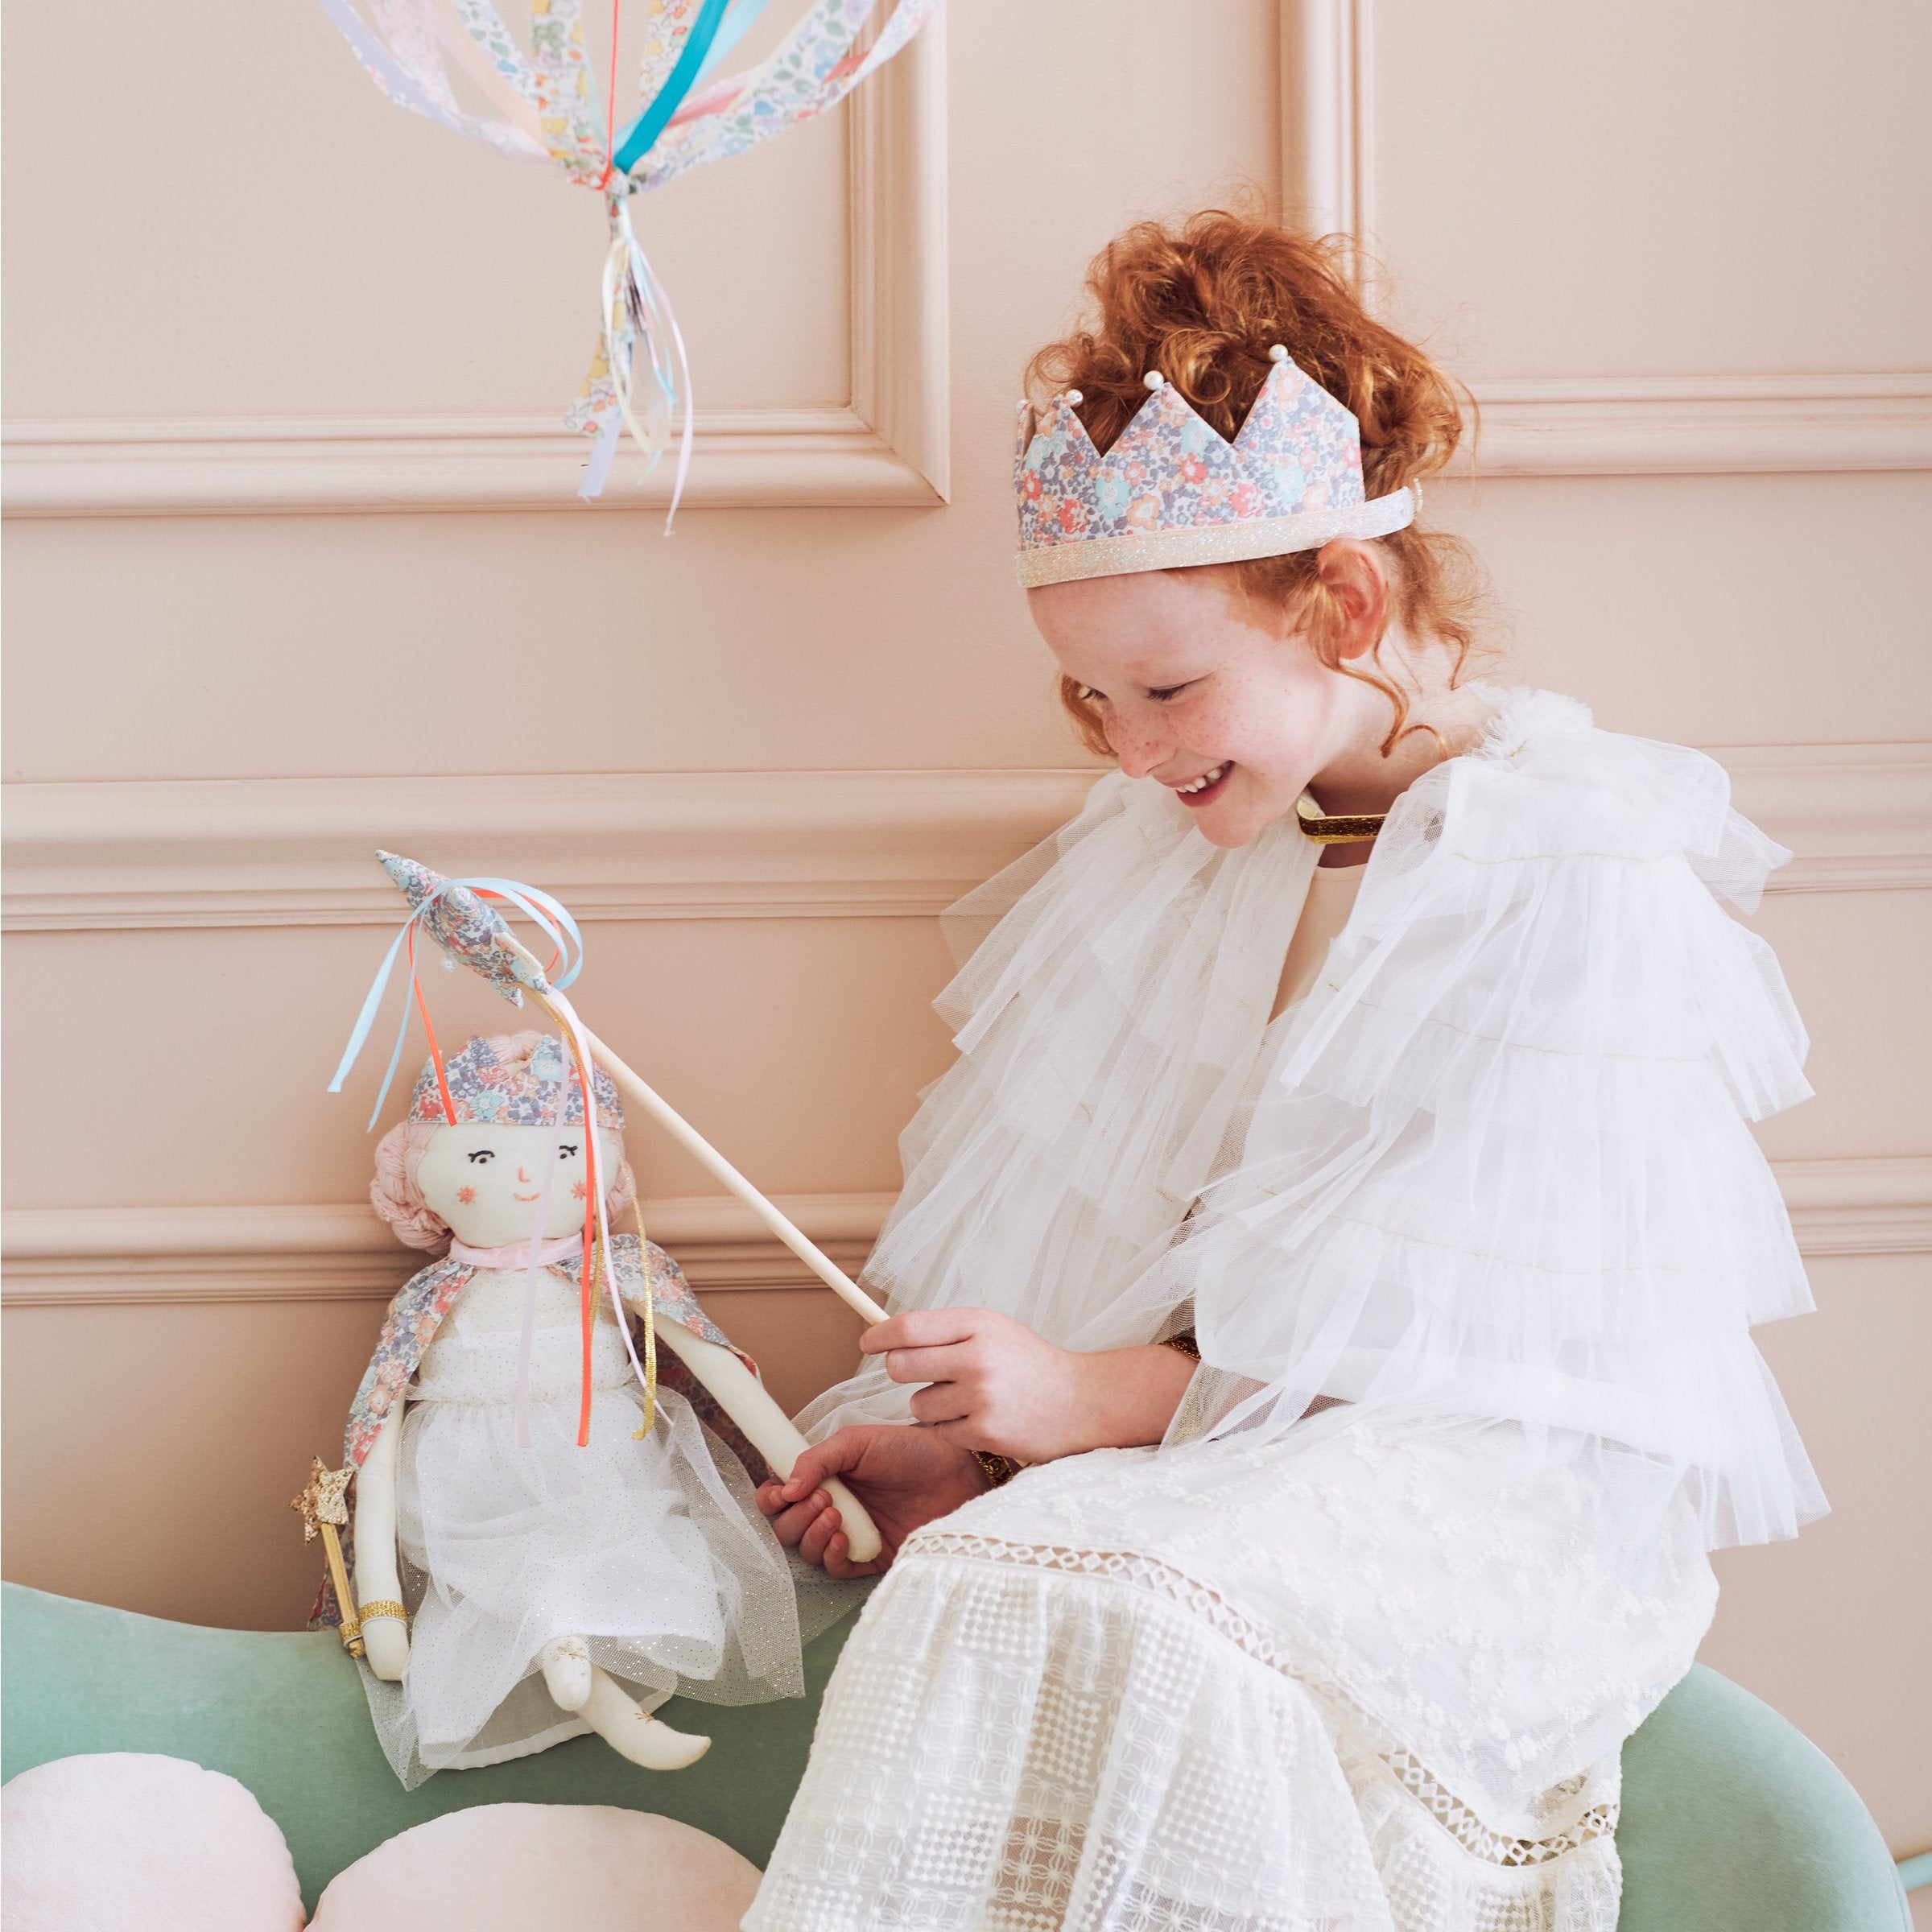 Our beautiful princess crown made with Liberty floral fabric is beautifully embellished with fake pearls.